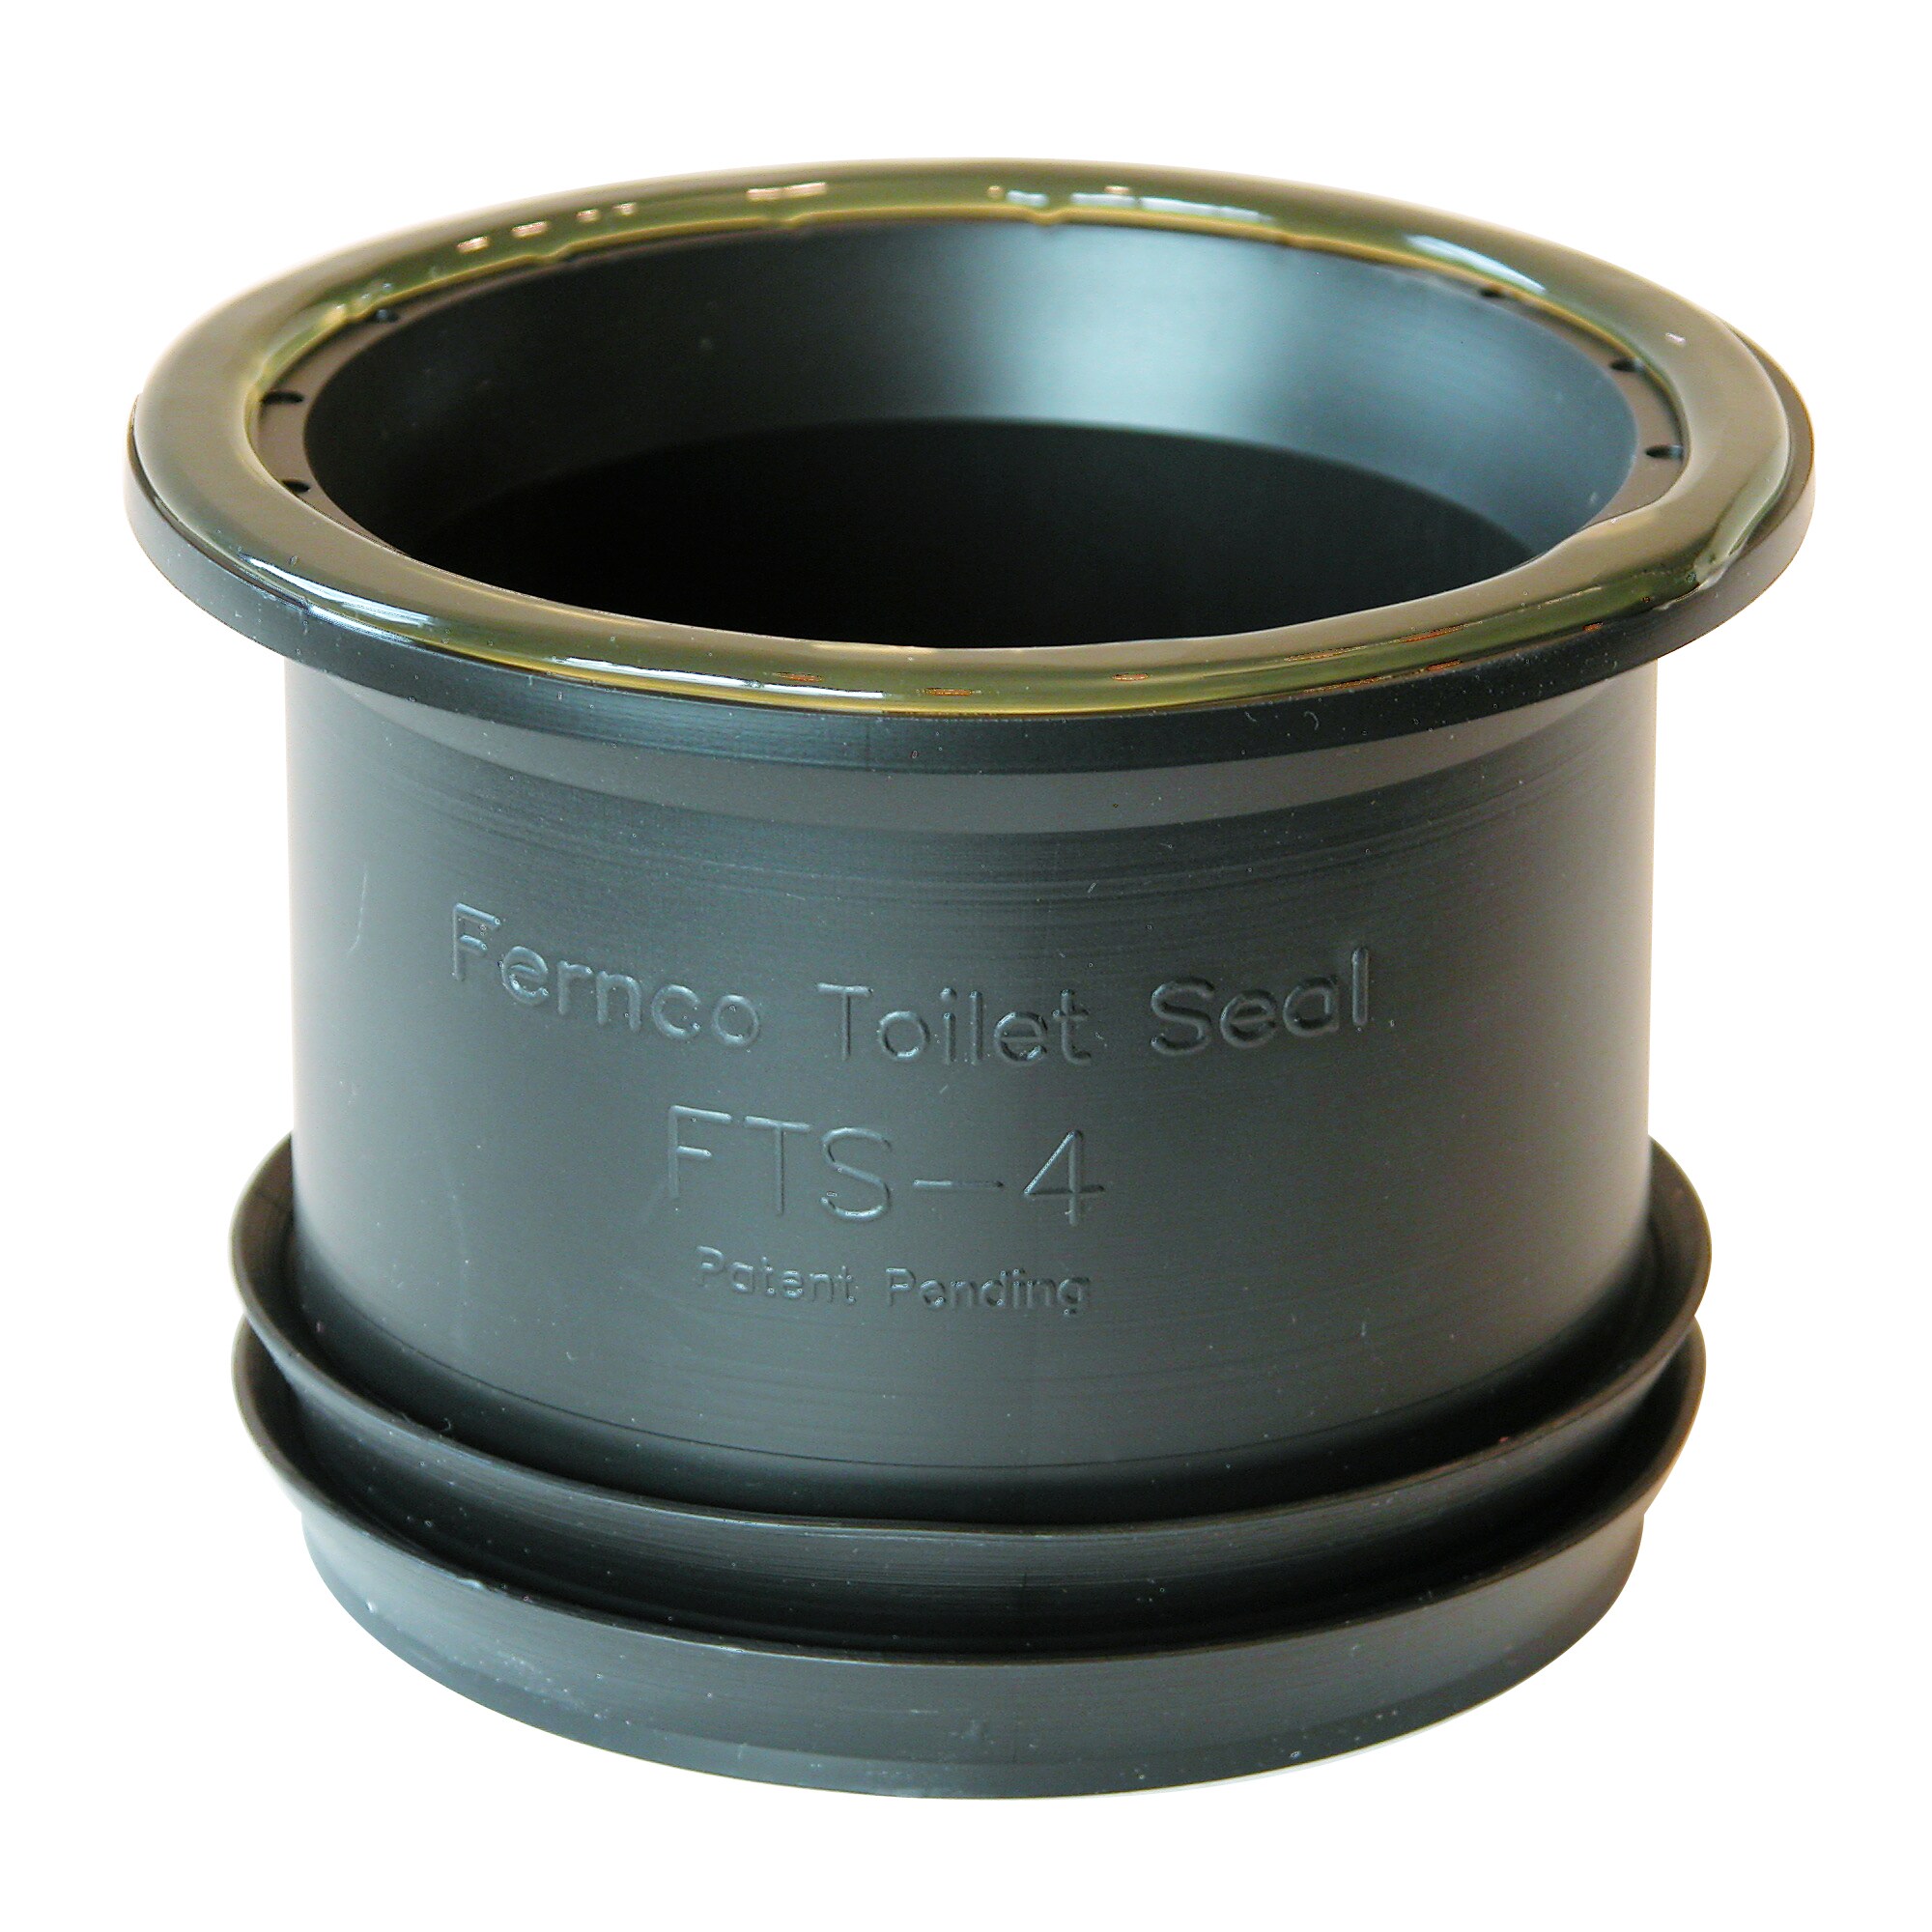 3x4 Flange for sale online Fernco Fts-4cf Wax Toilet Seal 